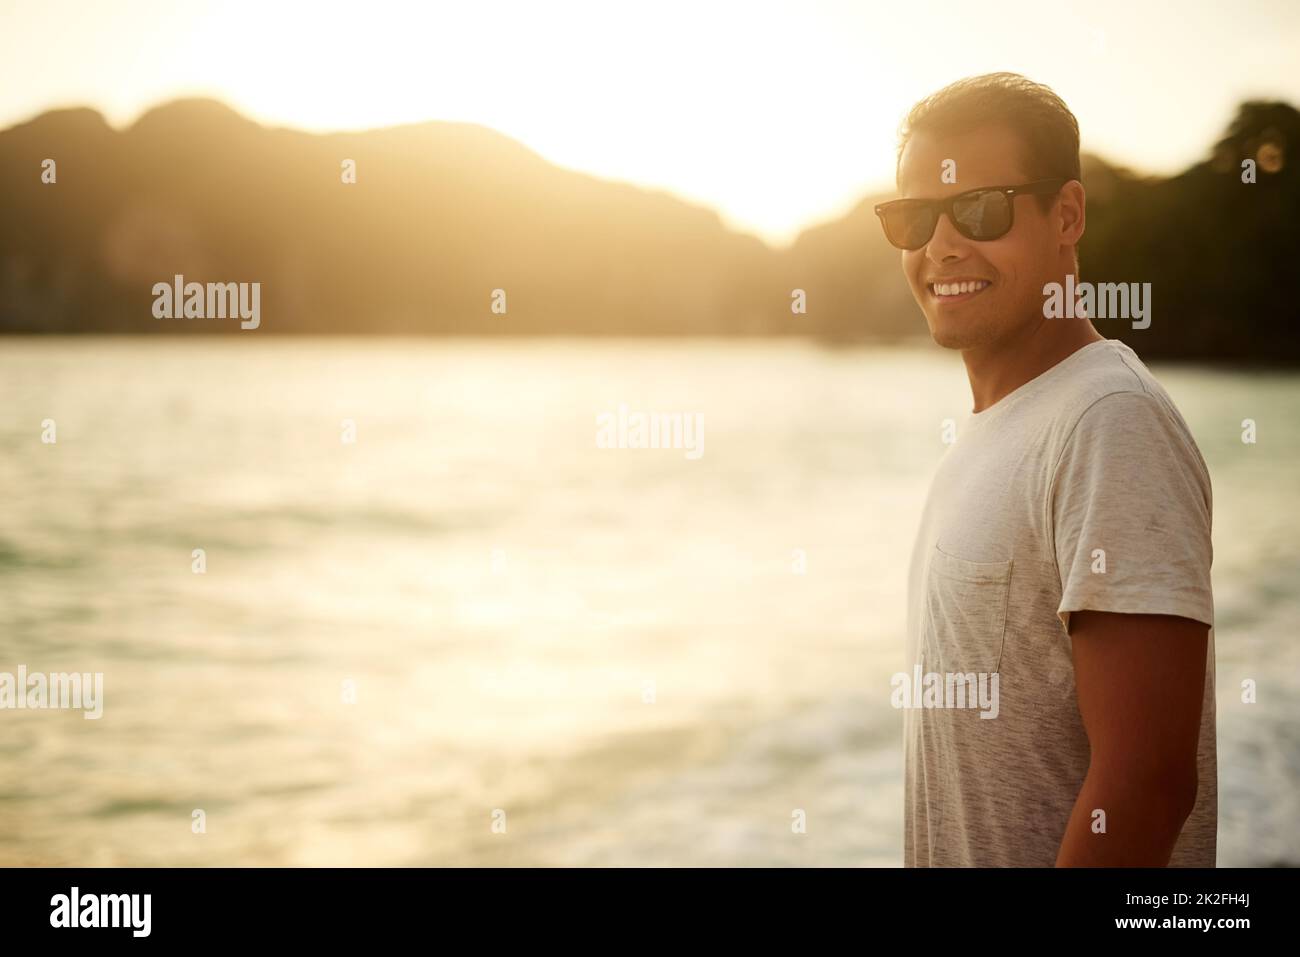 No better place than the beach. Portrait of a handsome young man standing on the beach at sunset. Stock Photo